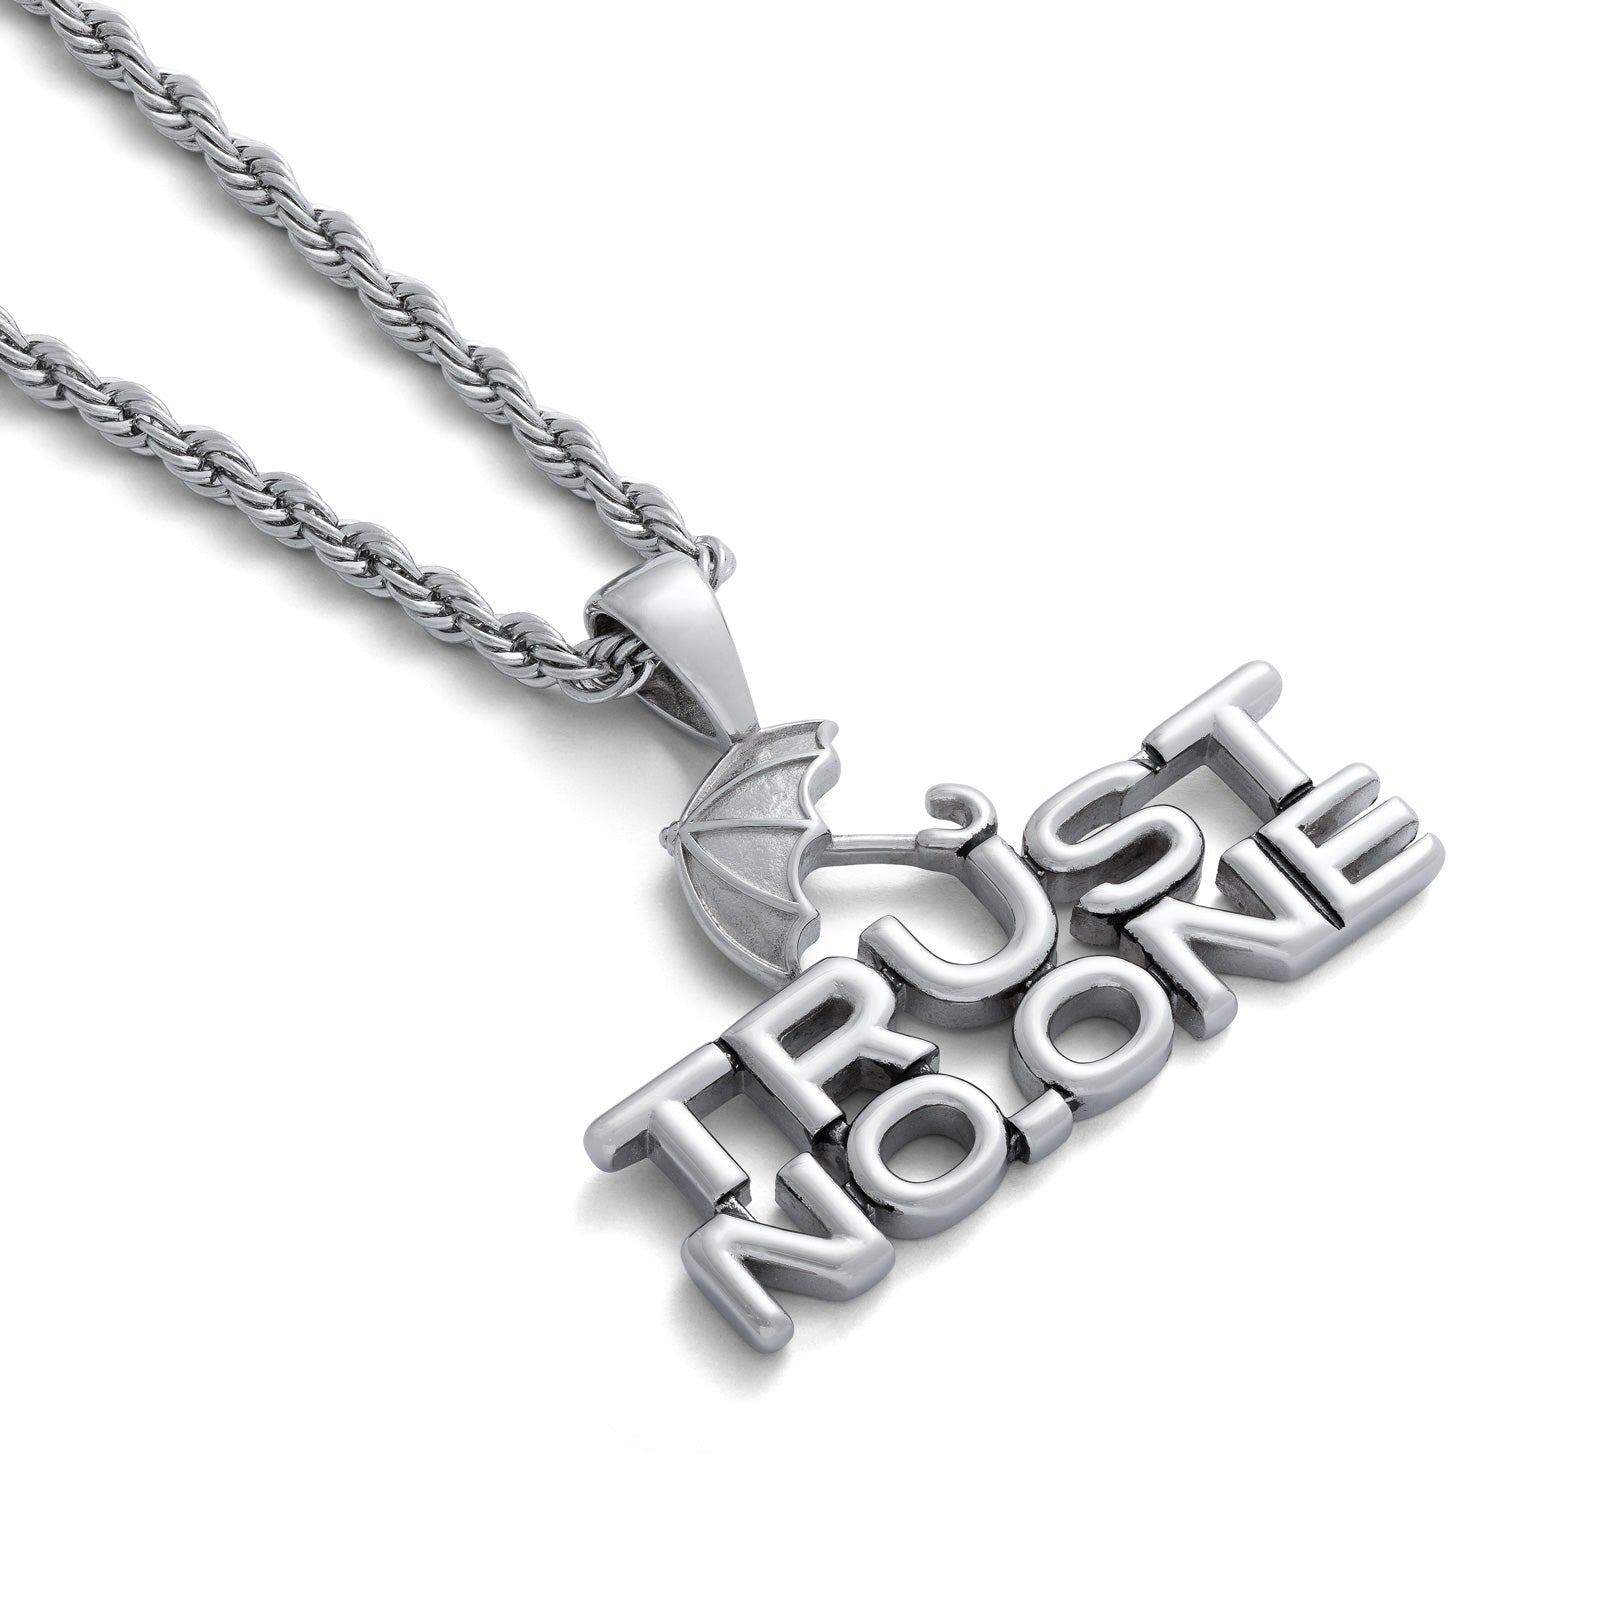 trust noone rapper necklace by statement collective